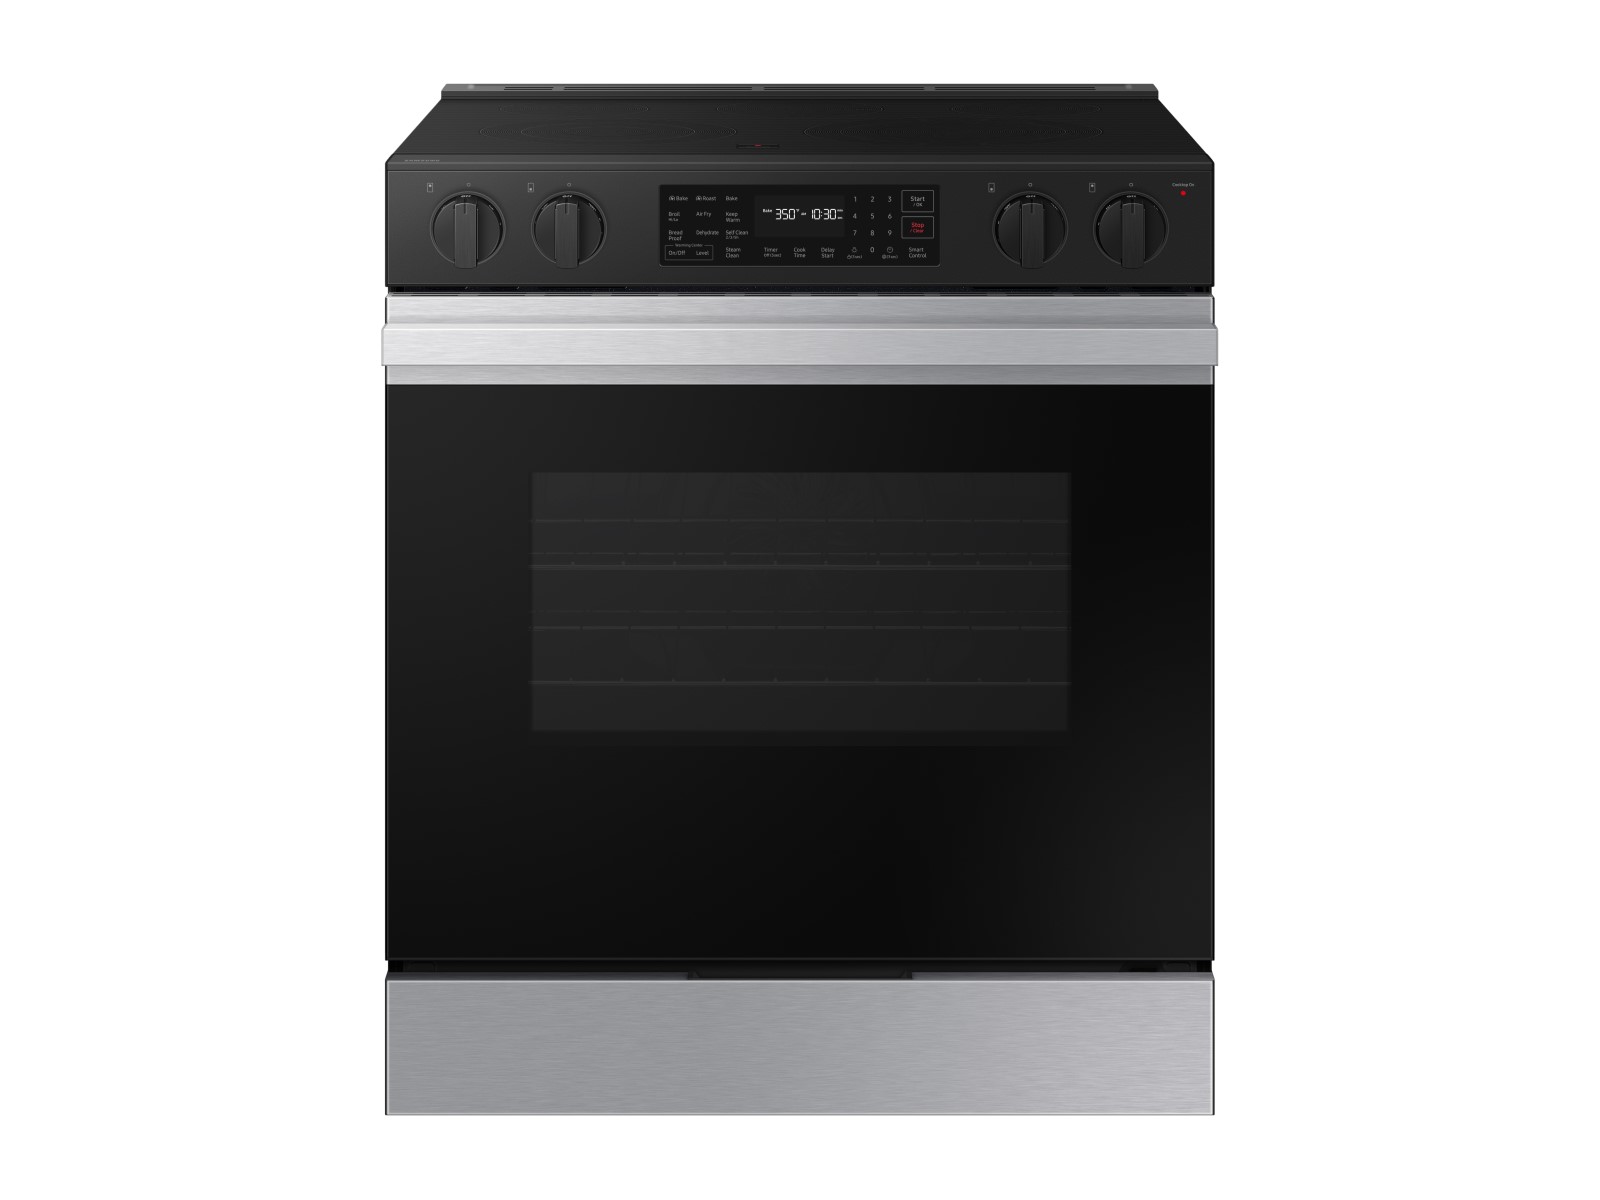 Bespoke Smart Slide-In Electric Range with Air Fry & Precision Knobs